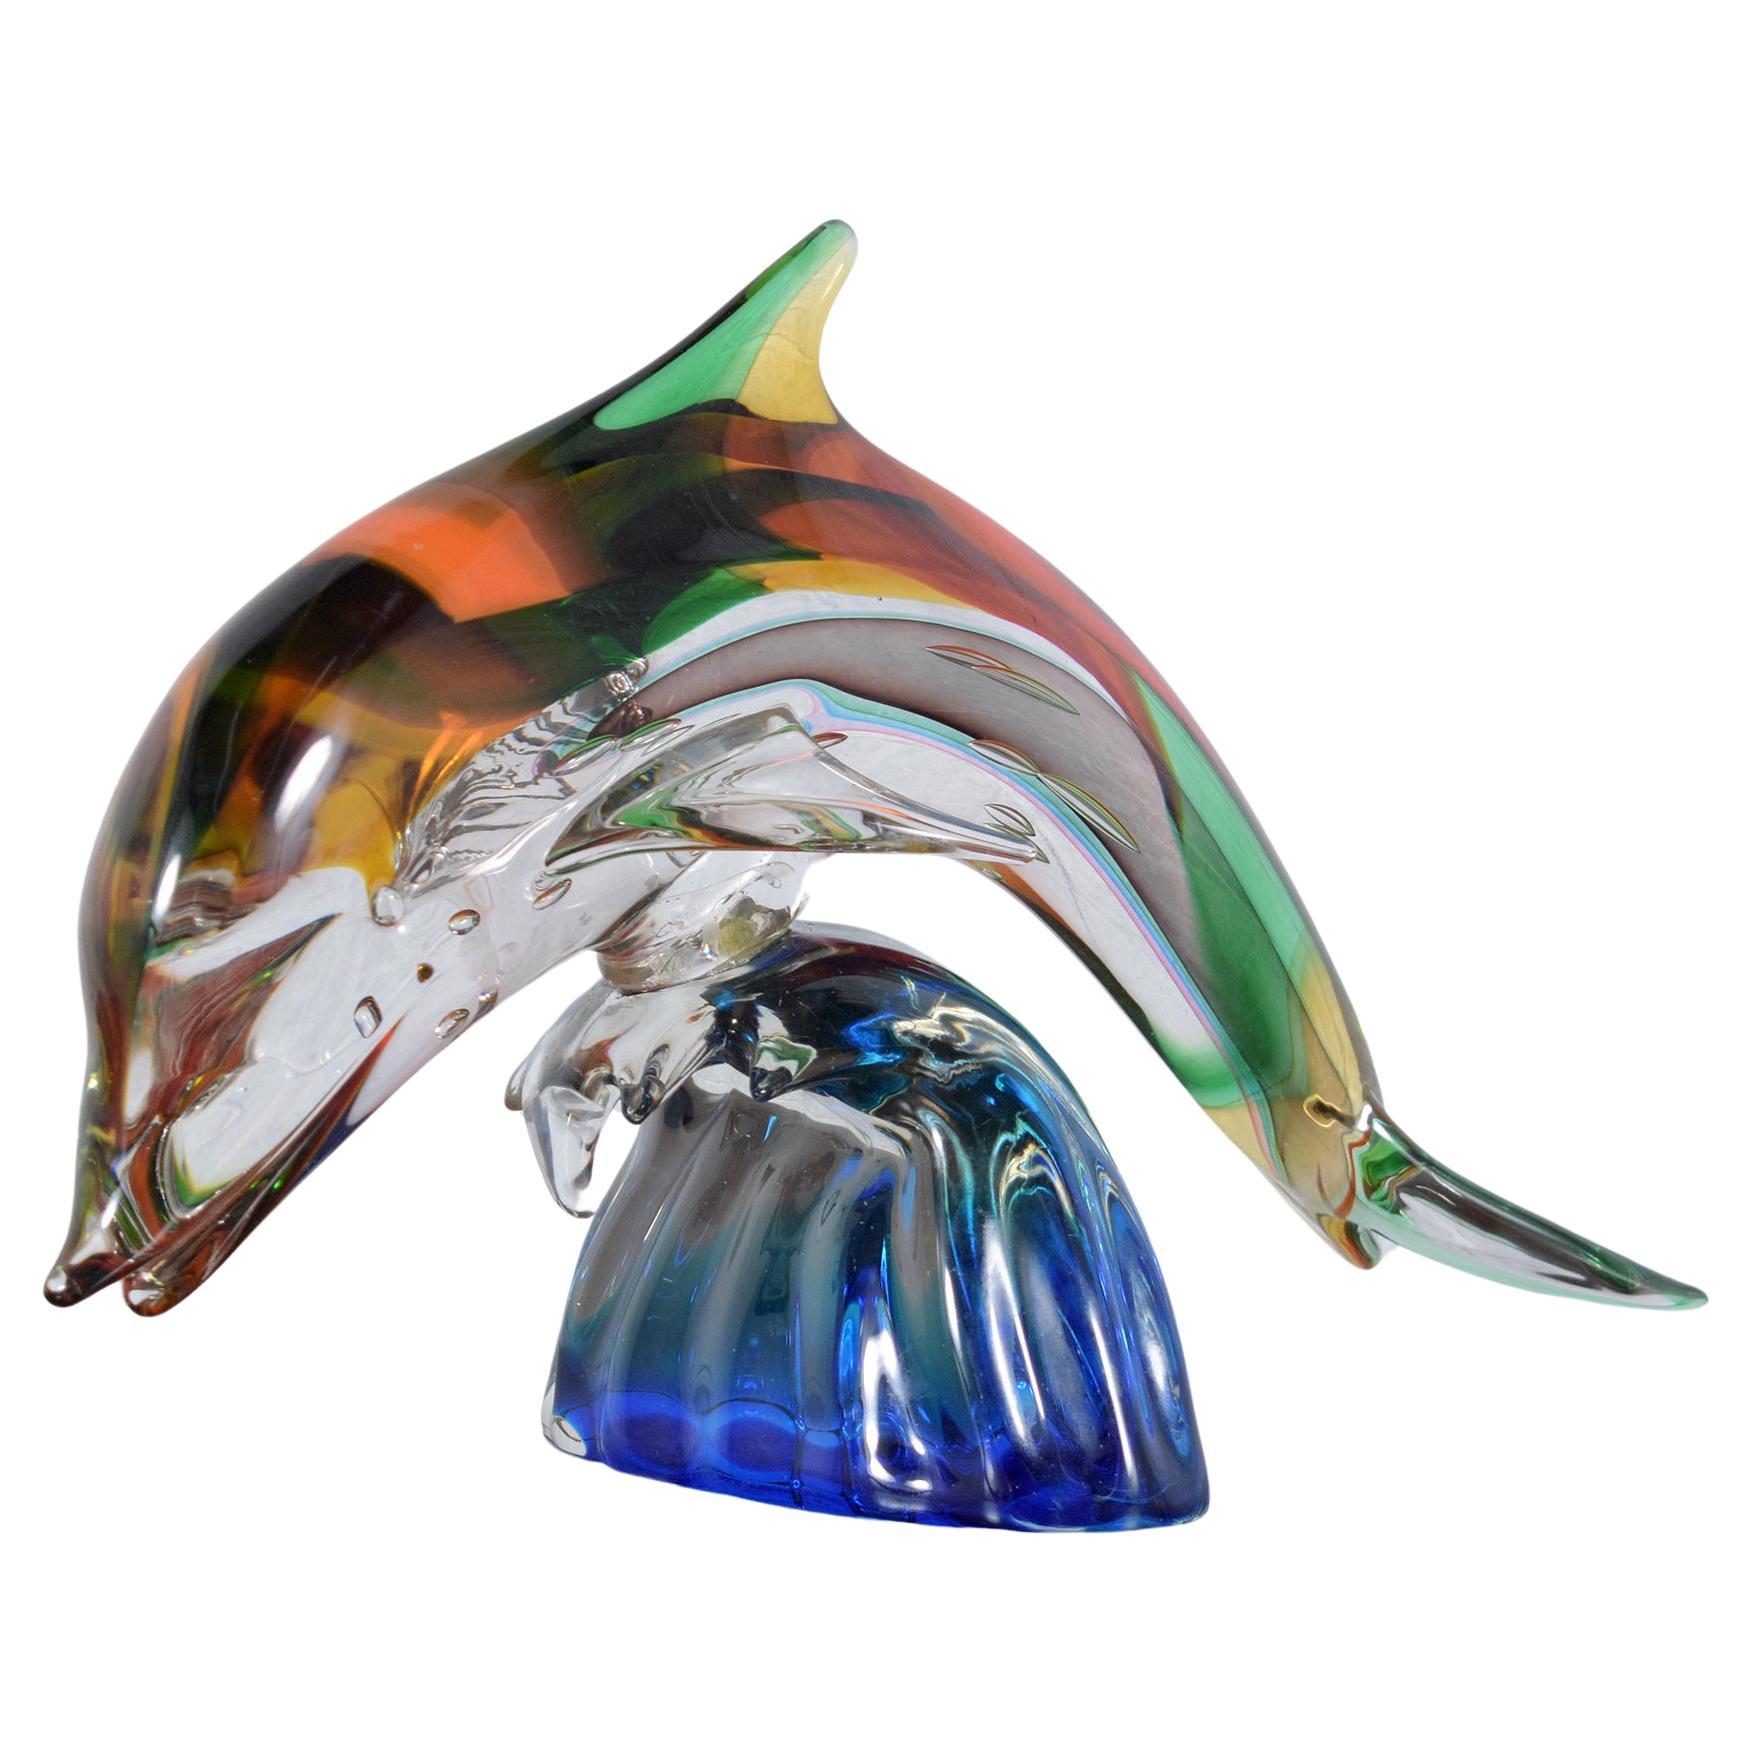 Murano Glass Dolphin Sculpture on Blue Wave Base: Multicolored Artistry